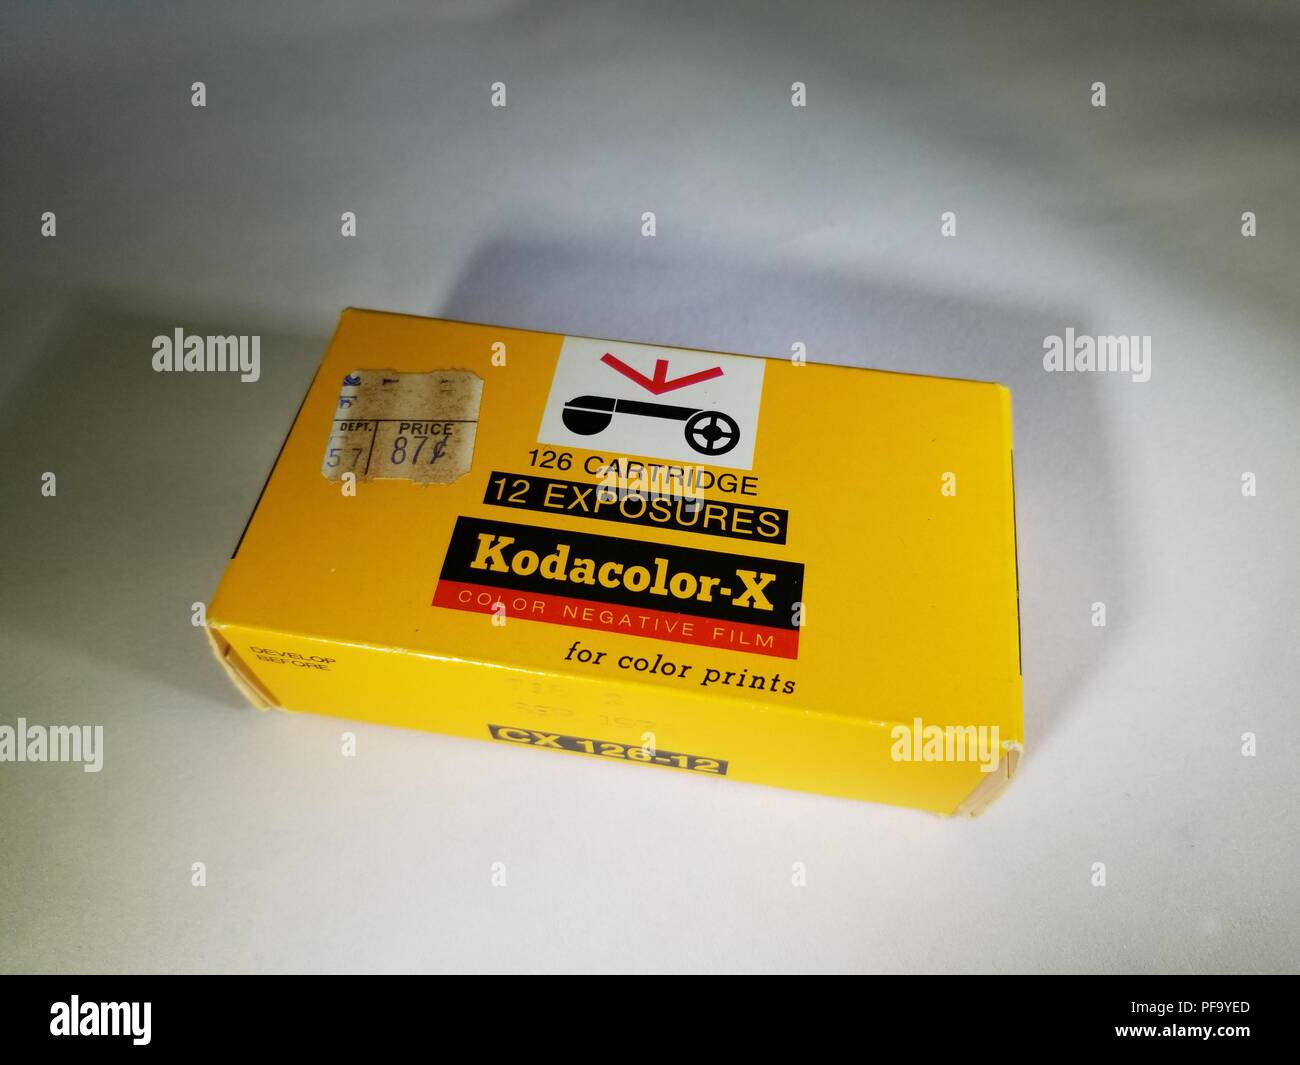 Close-up of yellow box of Kodak Kodacolor X color negative camera film in 126 format, with original price of 87 cents, February 21, 2018. () Stock Photo